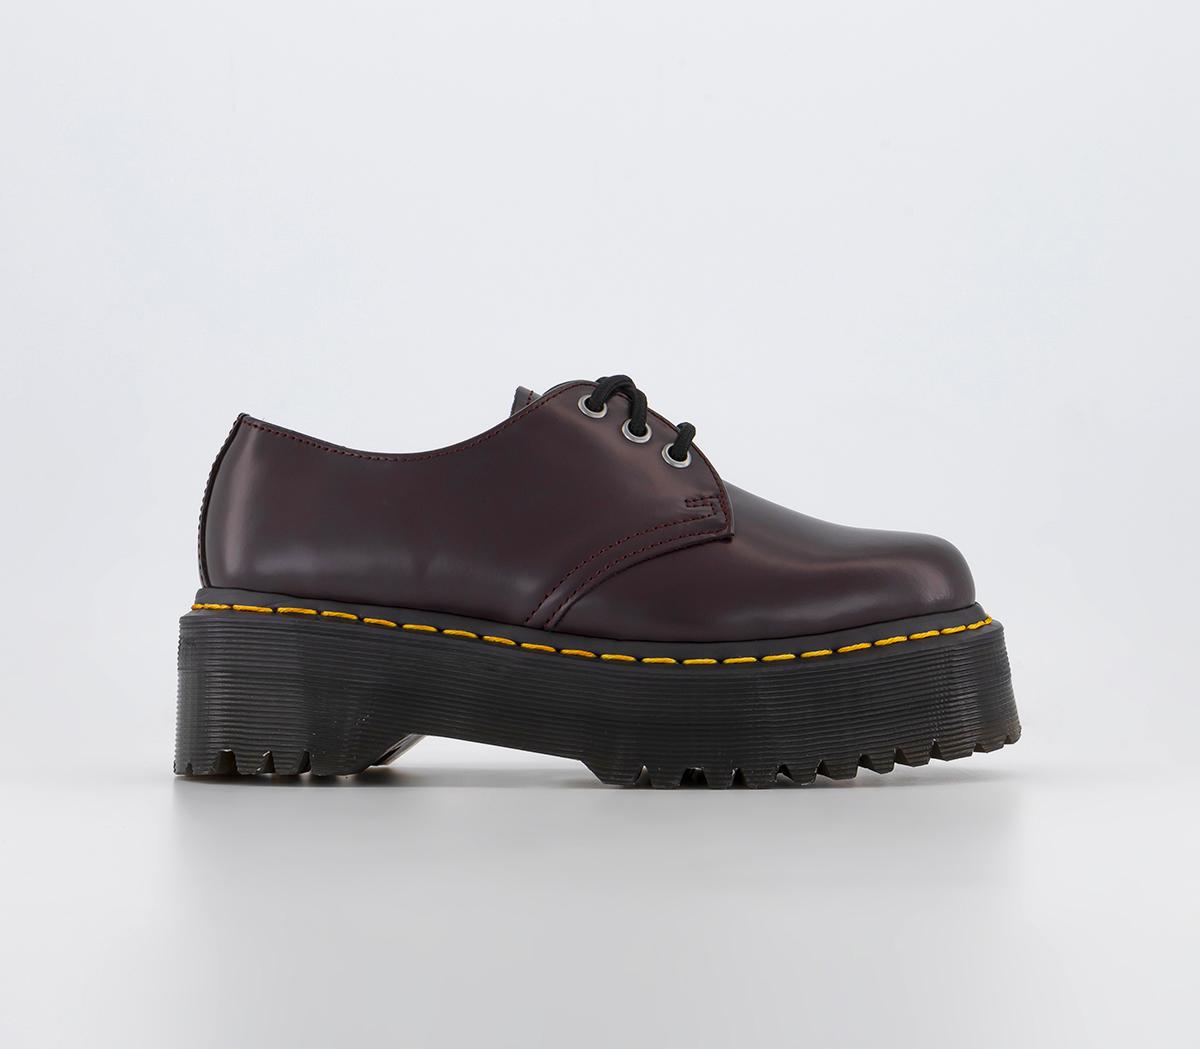 Dr. Martens 1461 Quad 3 Eye Shoes Burgundy Smooth - Flat Shoes for Women